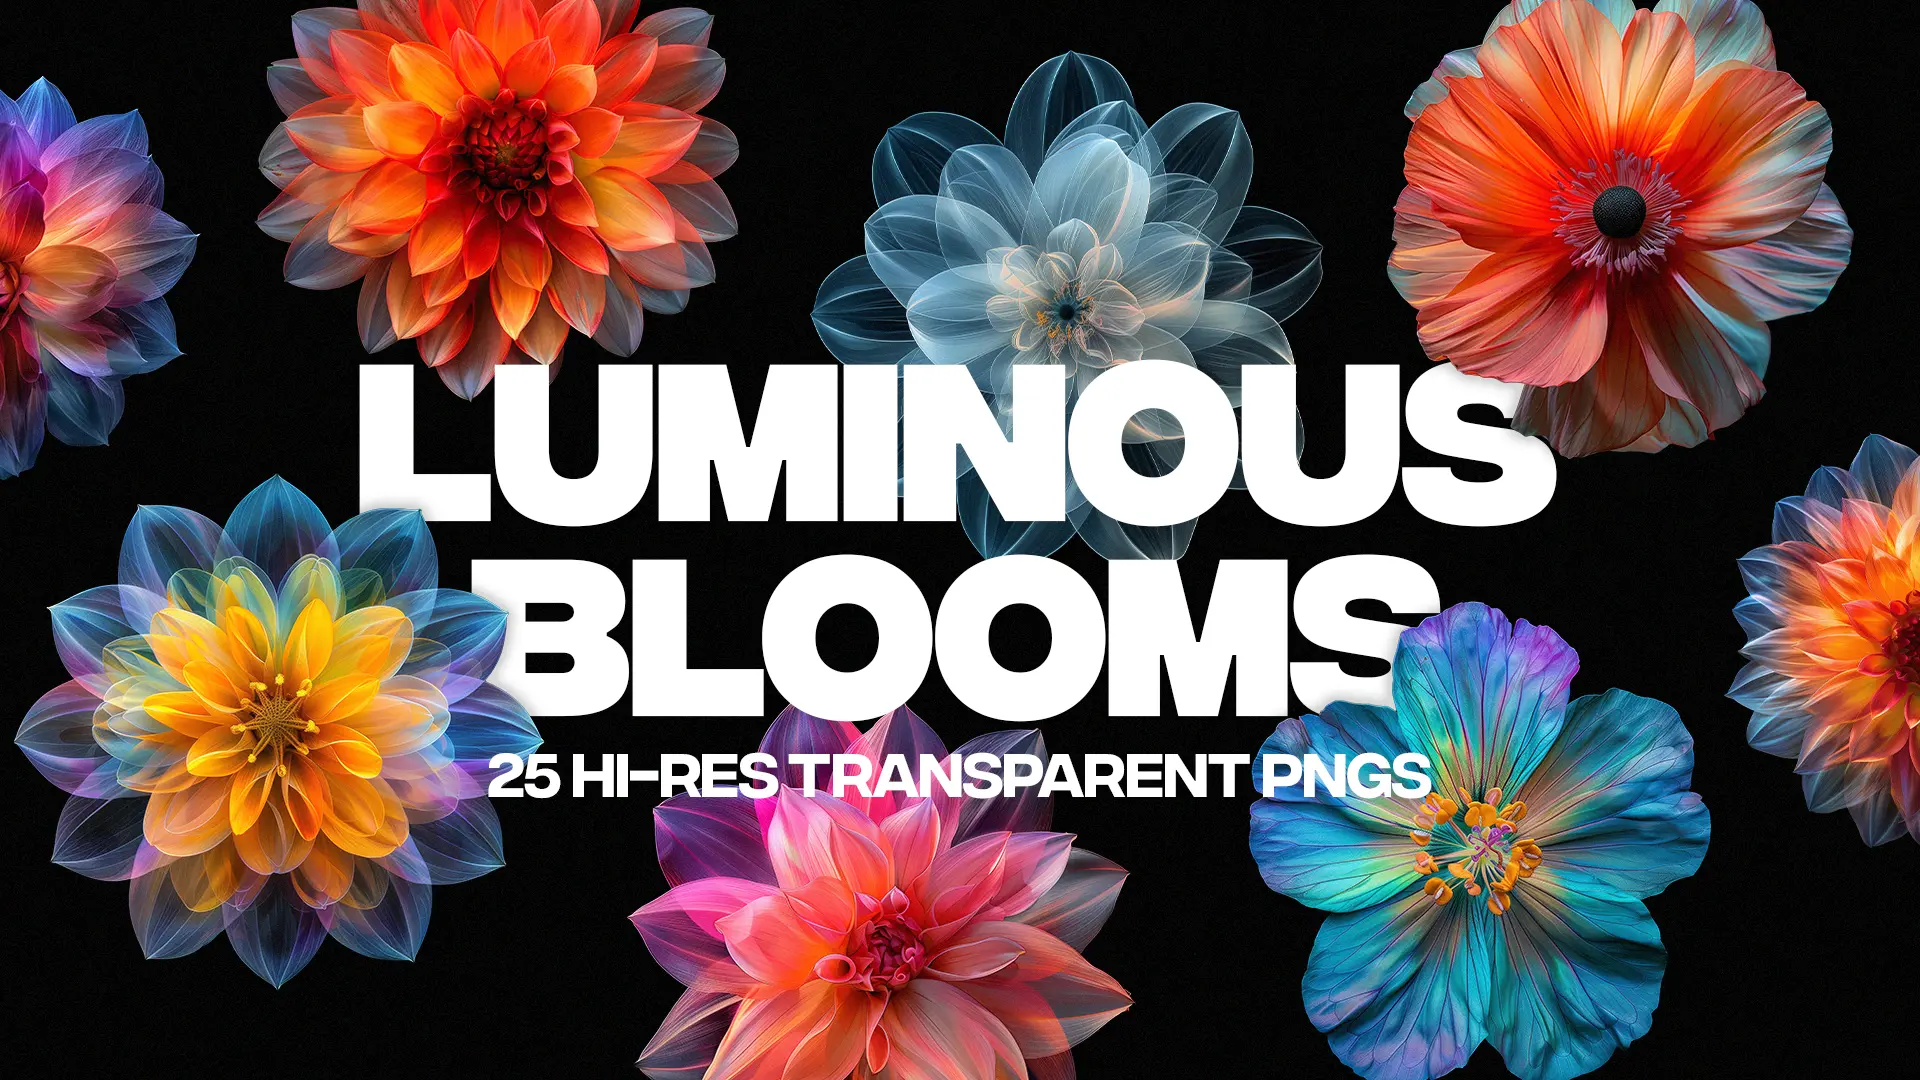 Elevate Your Church Media With Our &Quot;Luminous Blooms&Quot; Collection, Featuring 25 High-Resolution, Transparent Pngs. These Vibrant Florals Are Ideal For Spring Themes And Easter Events, Shining With Radiant Colors And Crisp Details.